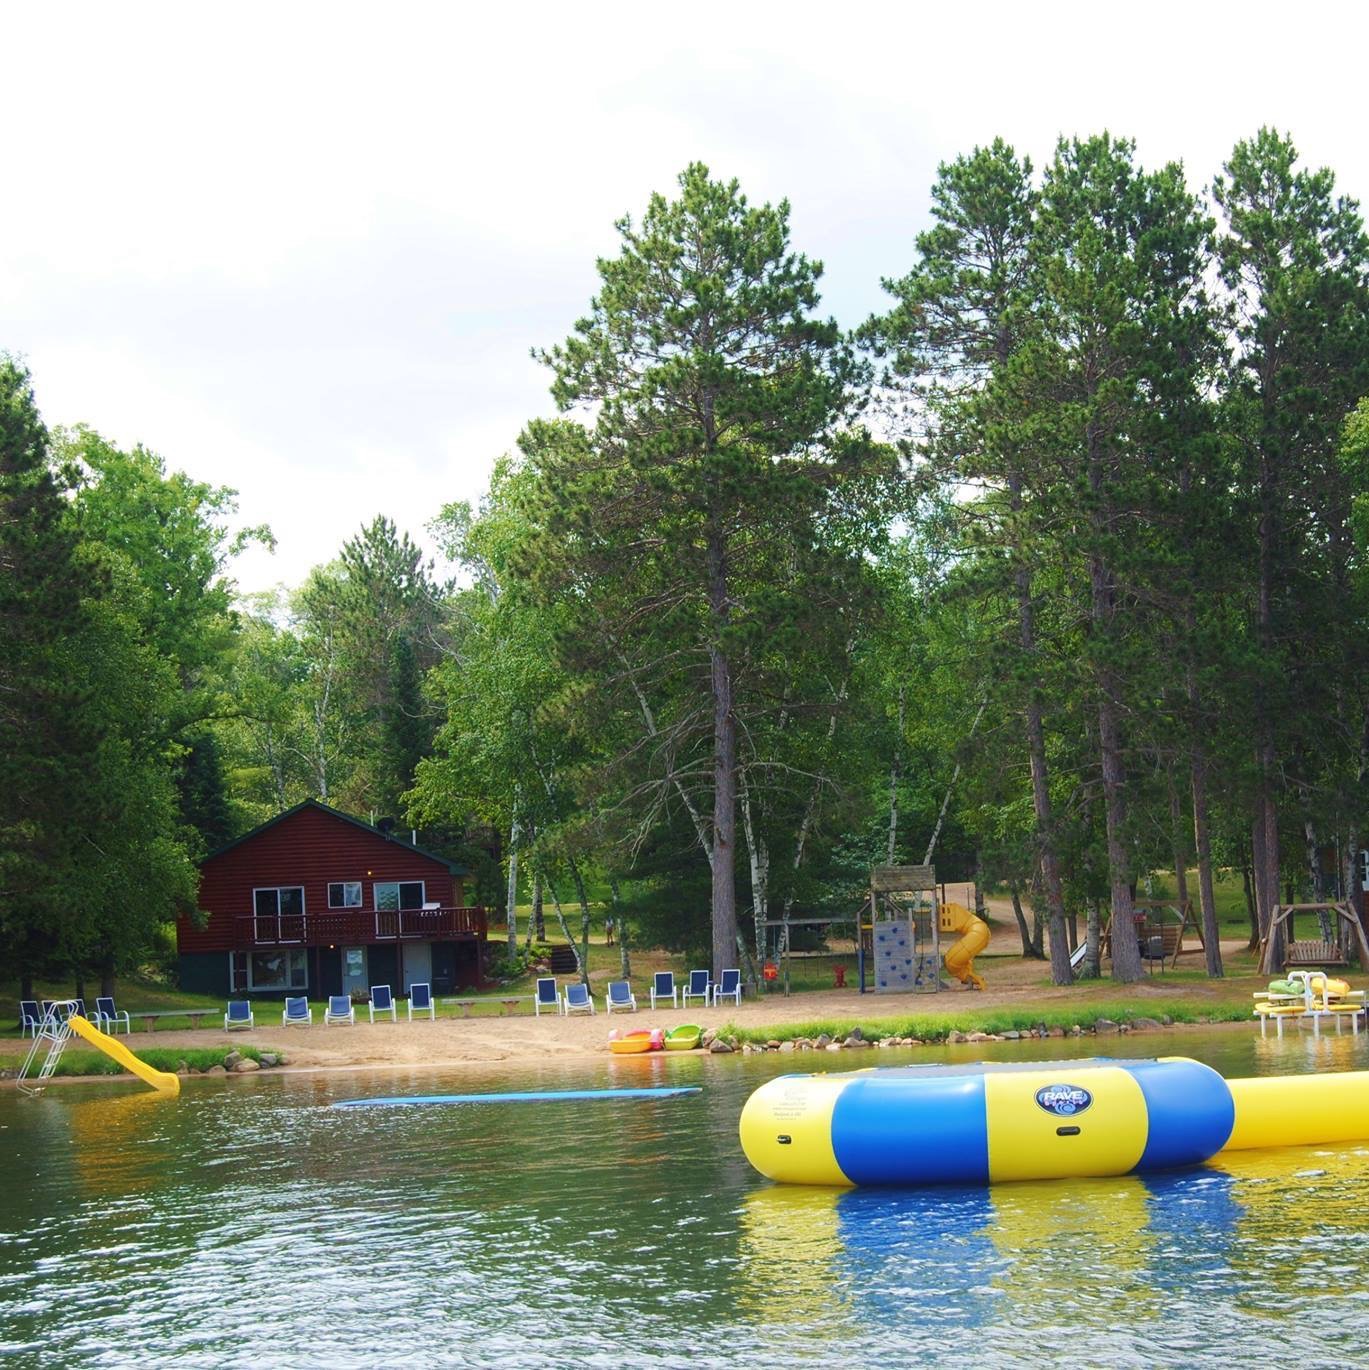 Inflatable trampoline on the lake.